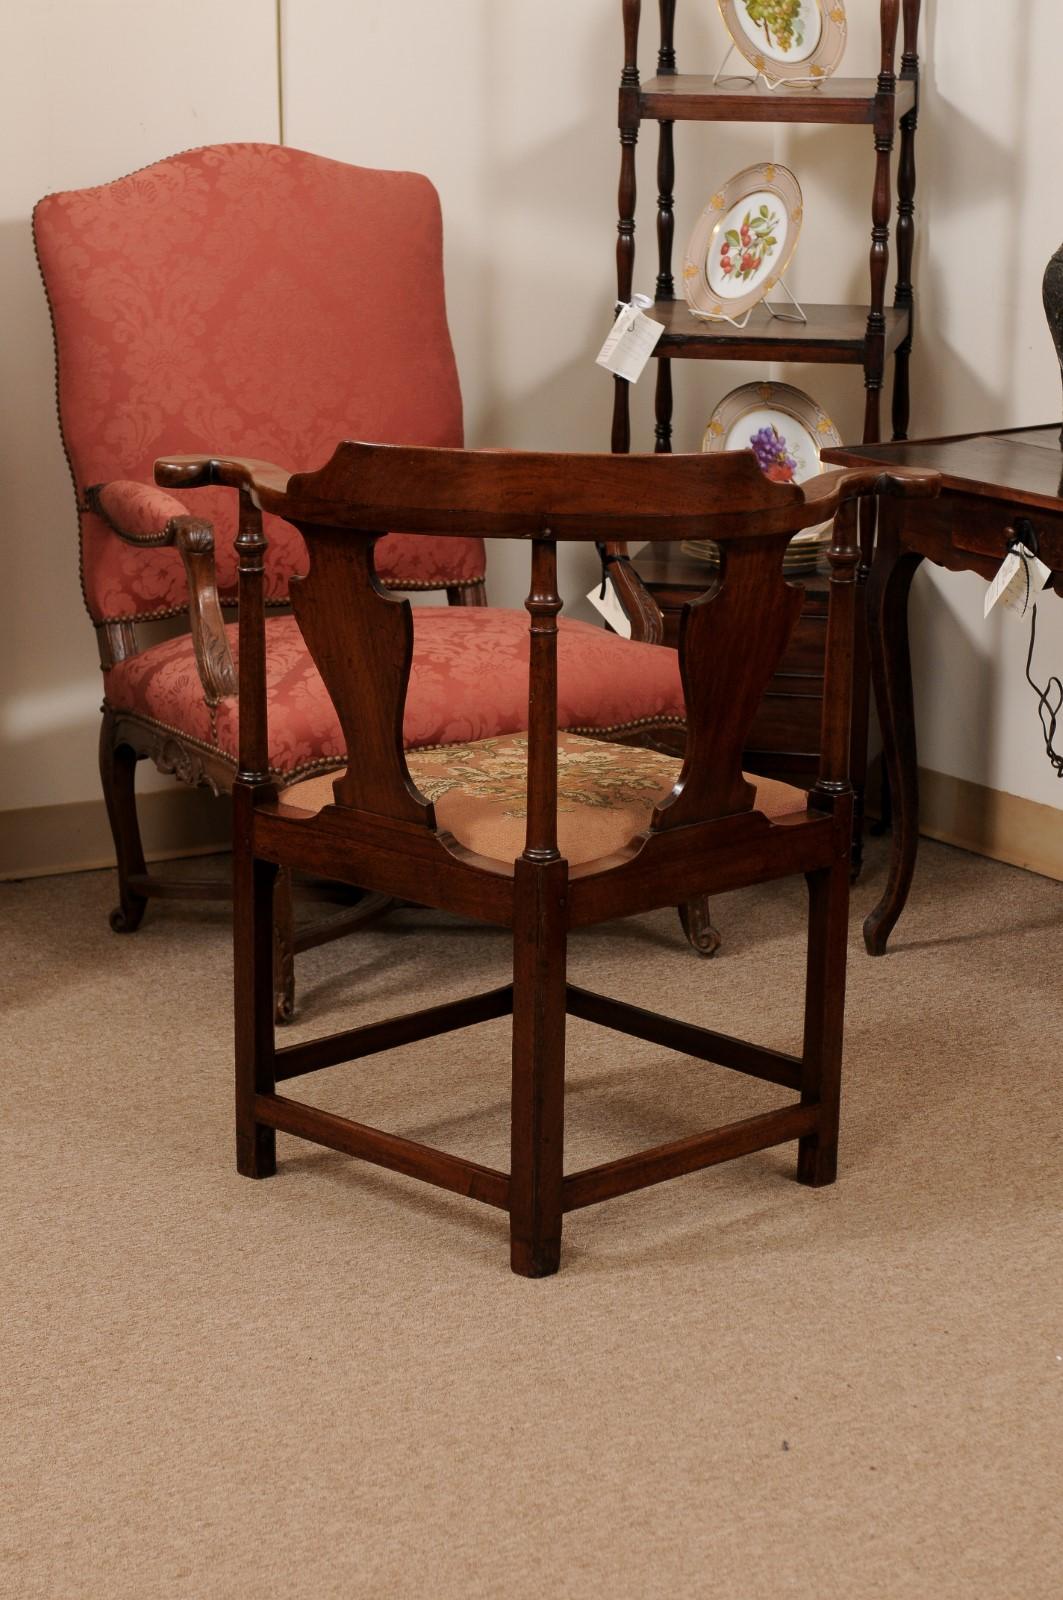 18th Century English Mahogany Corner Chair with Rounded Back, Slip Seat 6